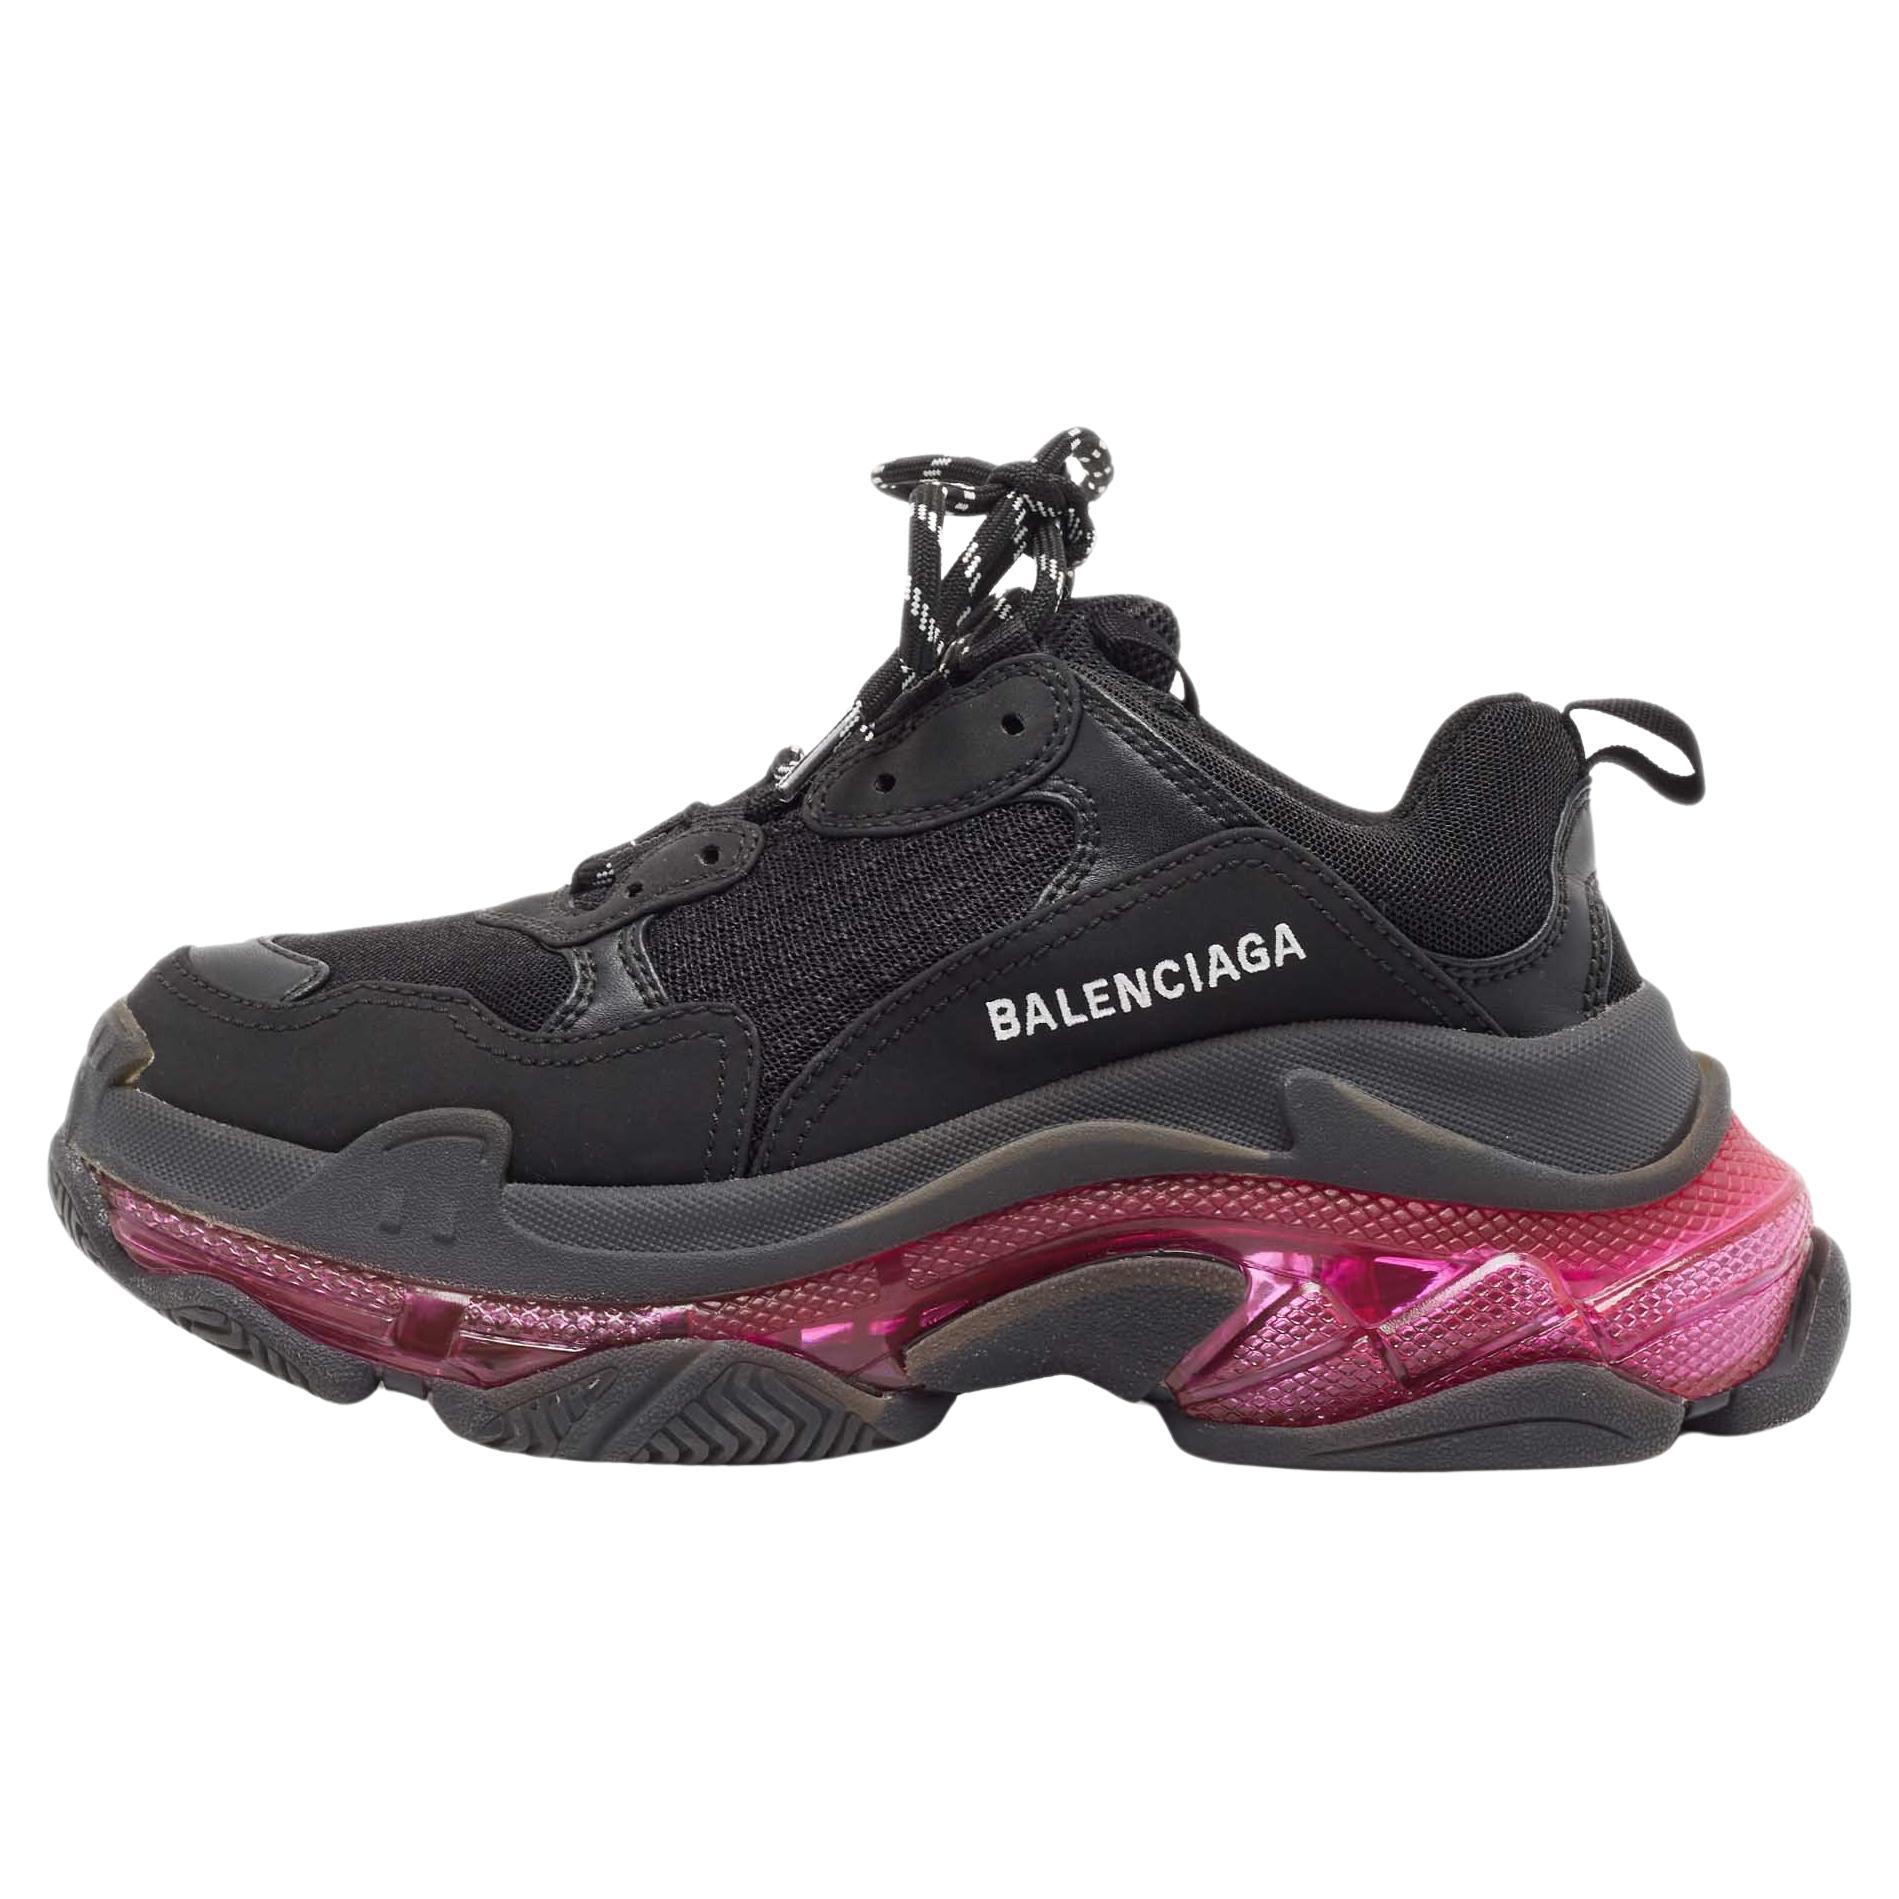 Balenciaga Black Leather and Mesh Triple S Clear Sneakers Size 37